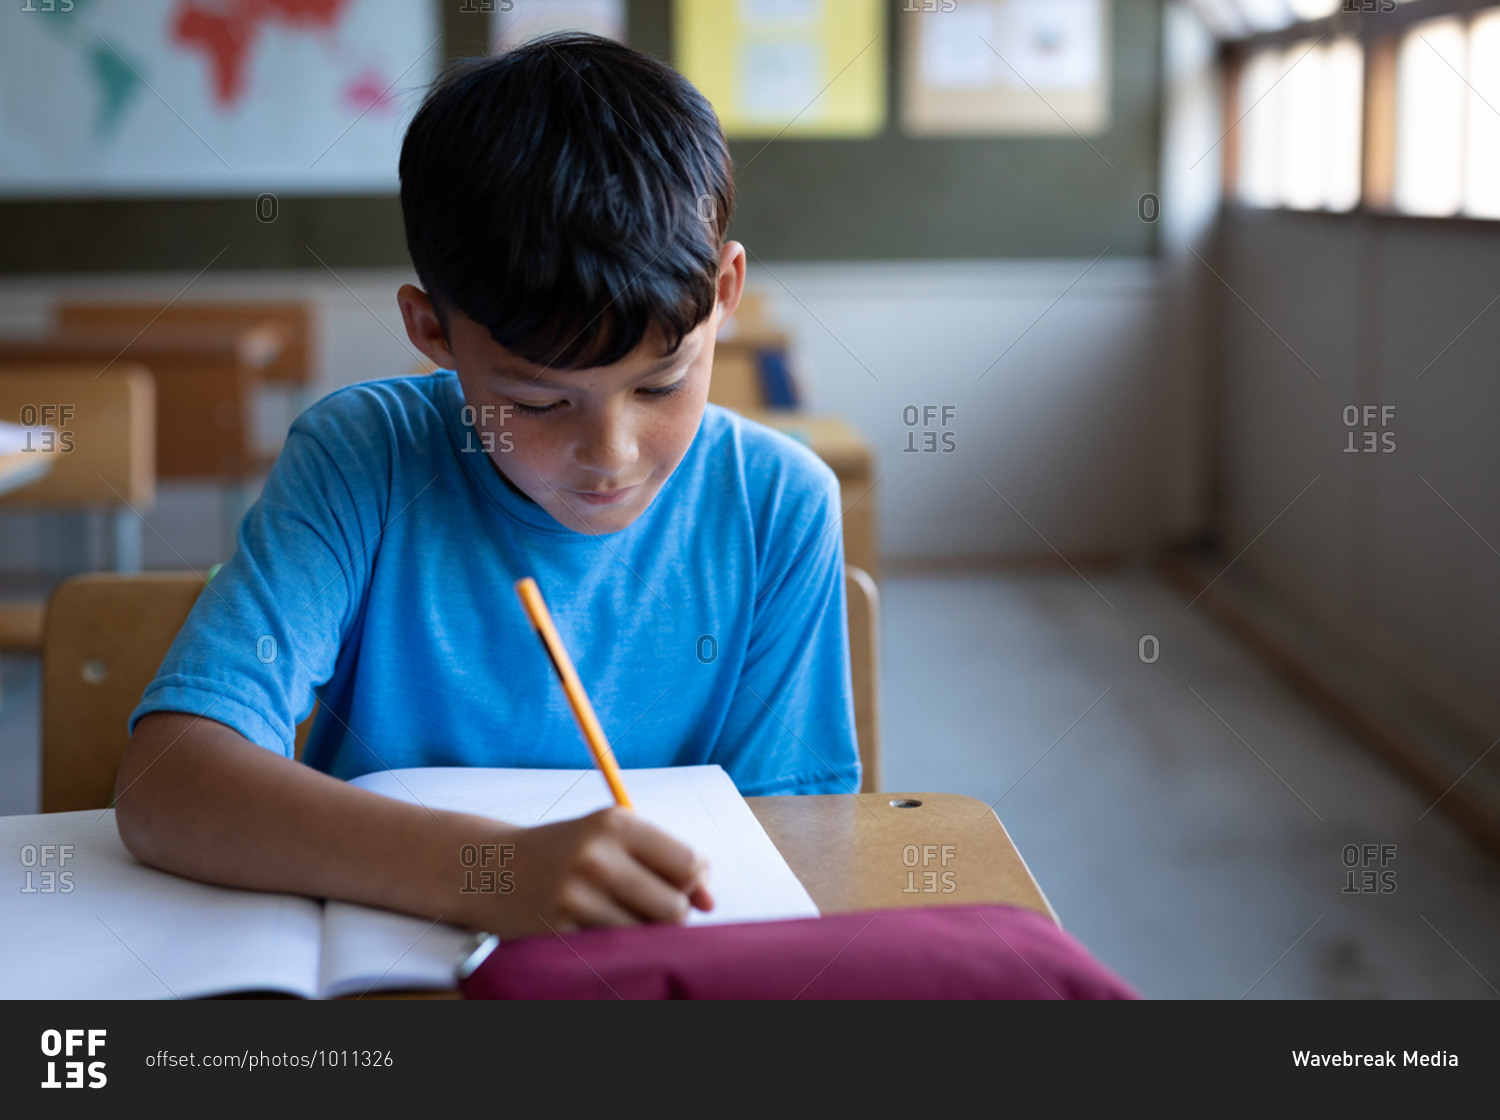 Mixed race boy writing in a book while sitting on his desk at school. Primary education social distancing health safety during Covid19 Coronavirus pandemic.